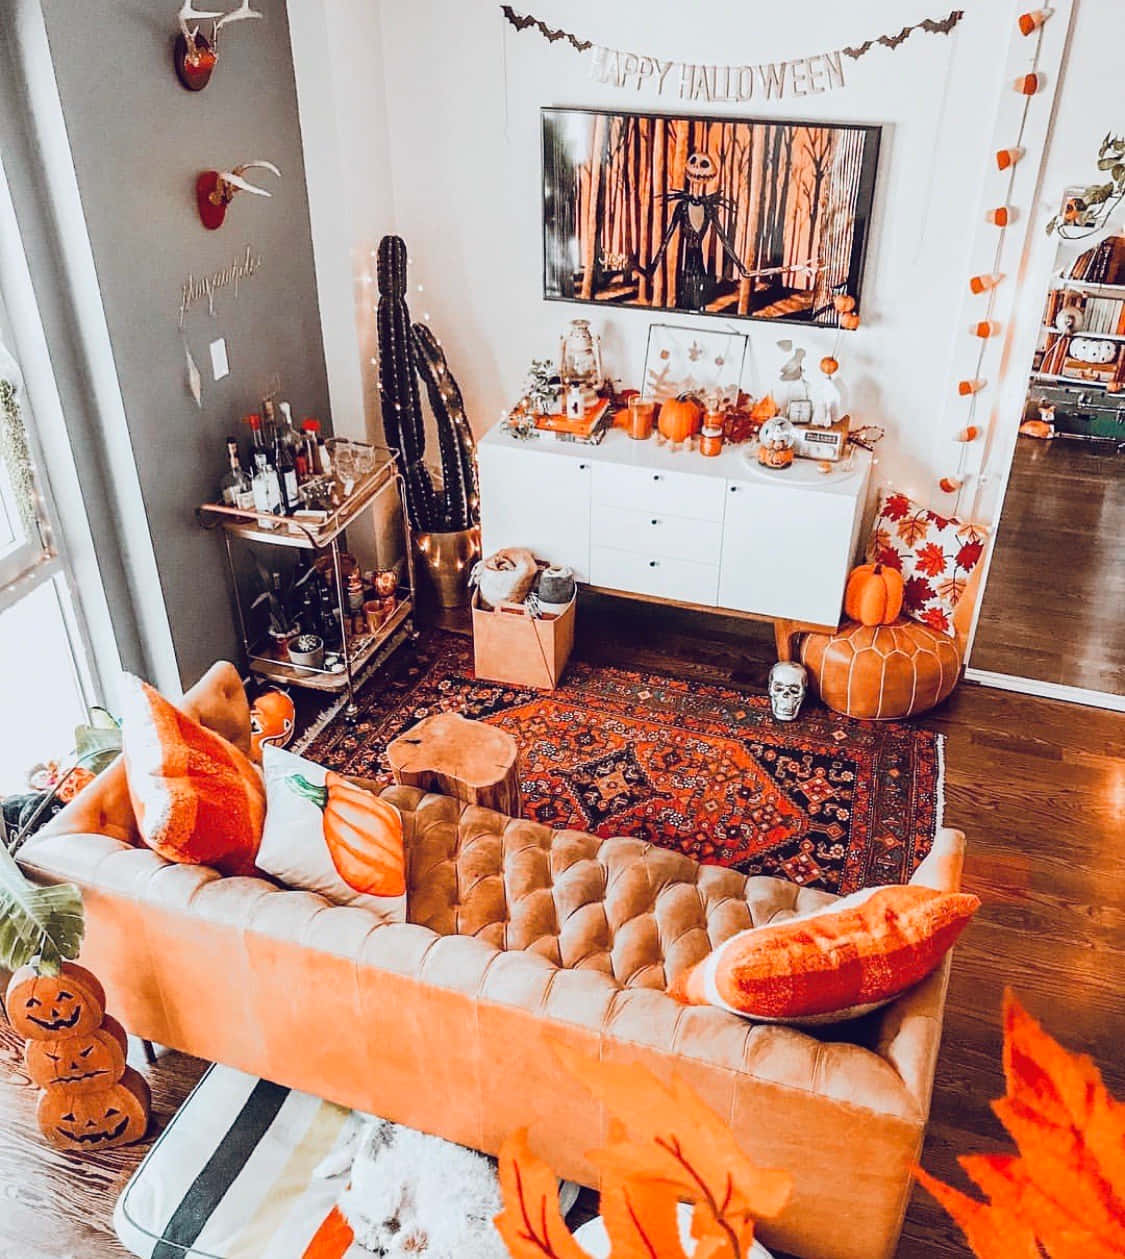 A Living Room Decorated For Halloween With Orange Pumpkins And Orange Decor